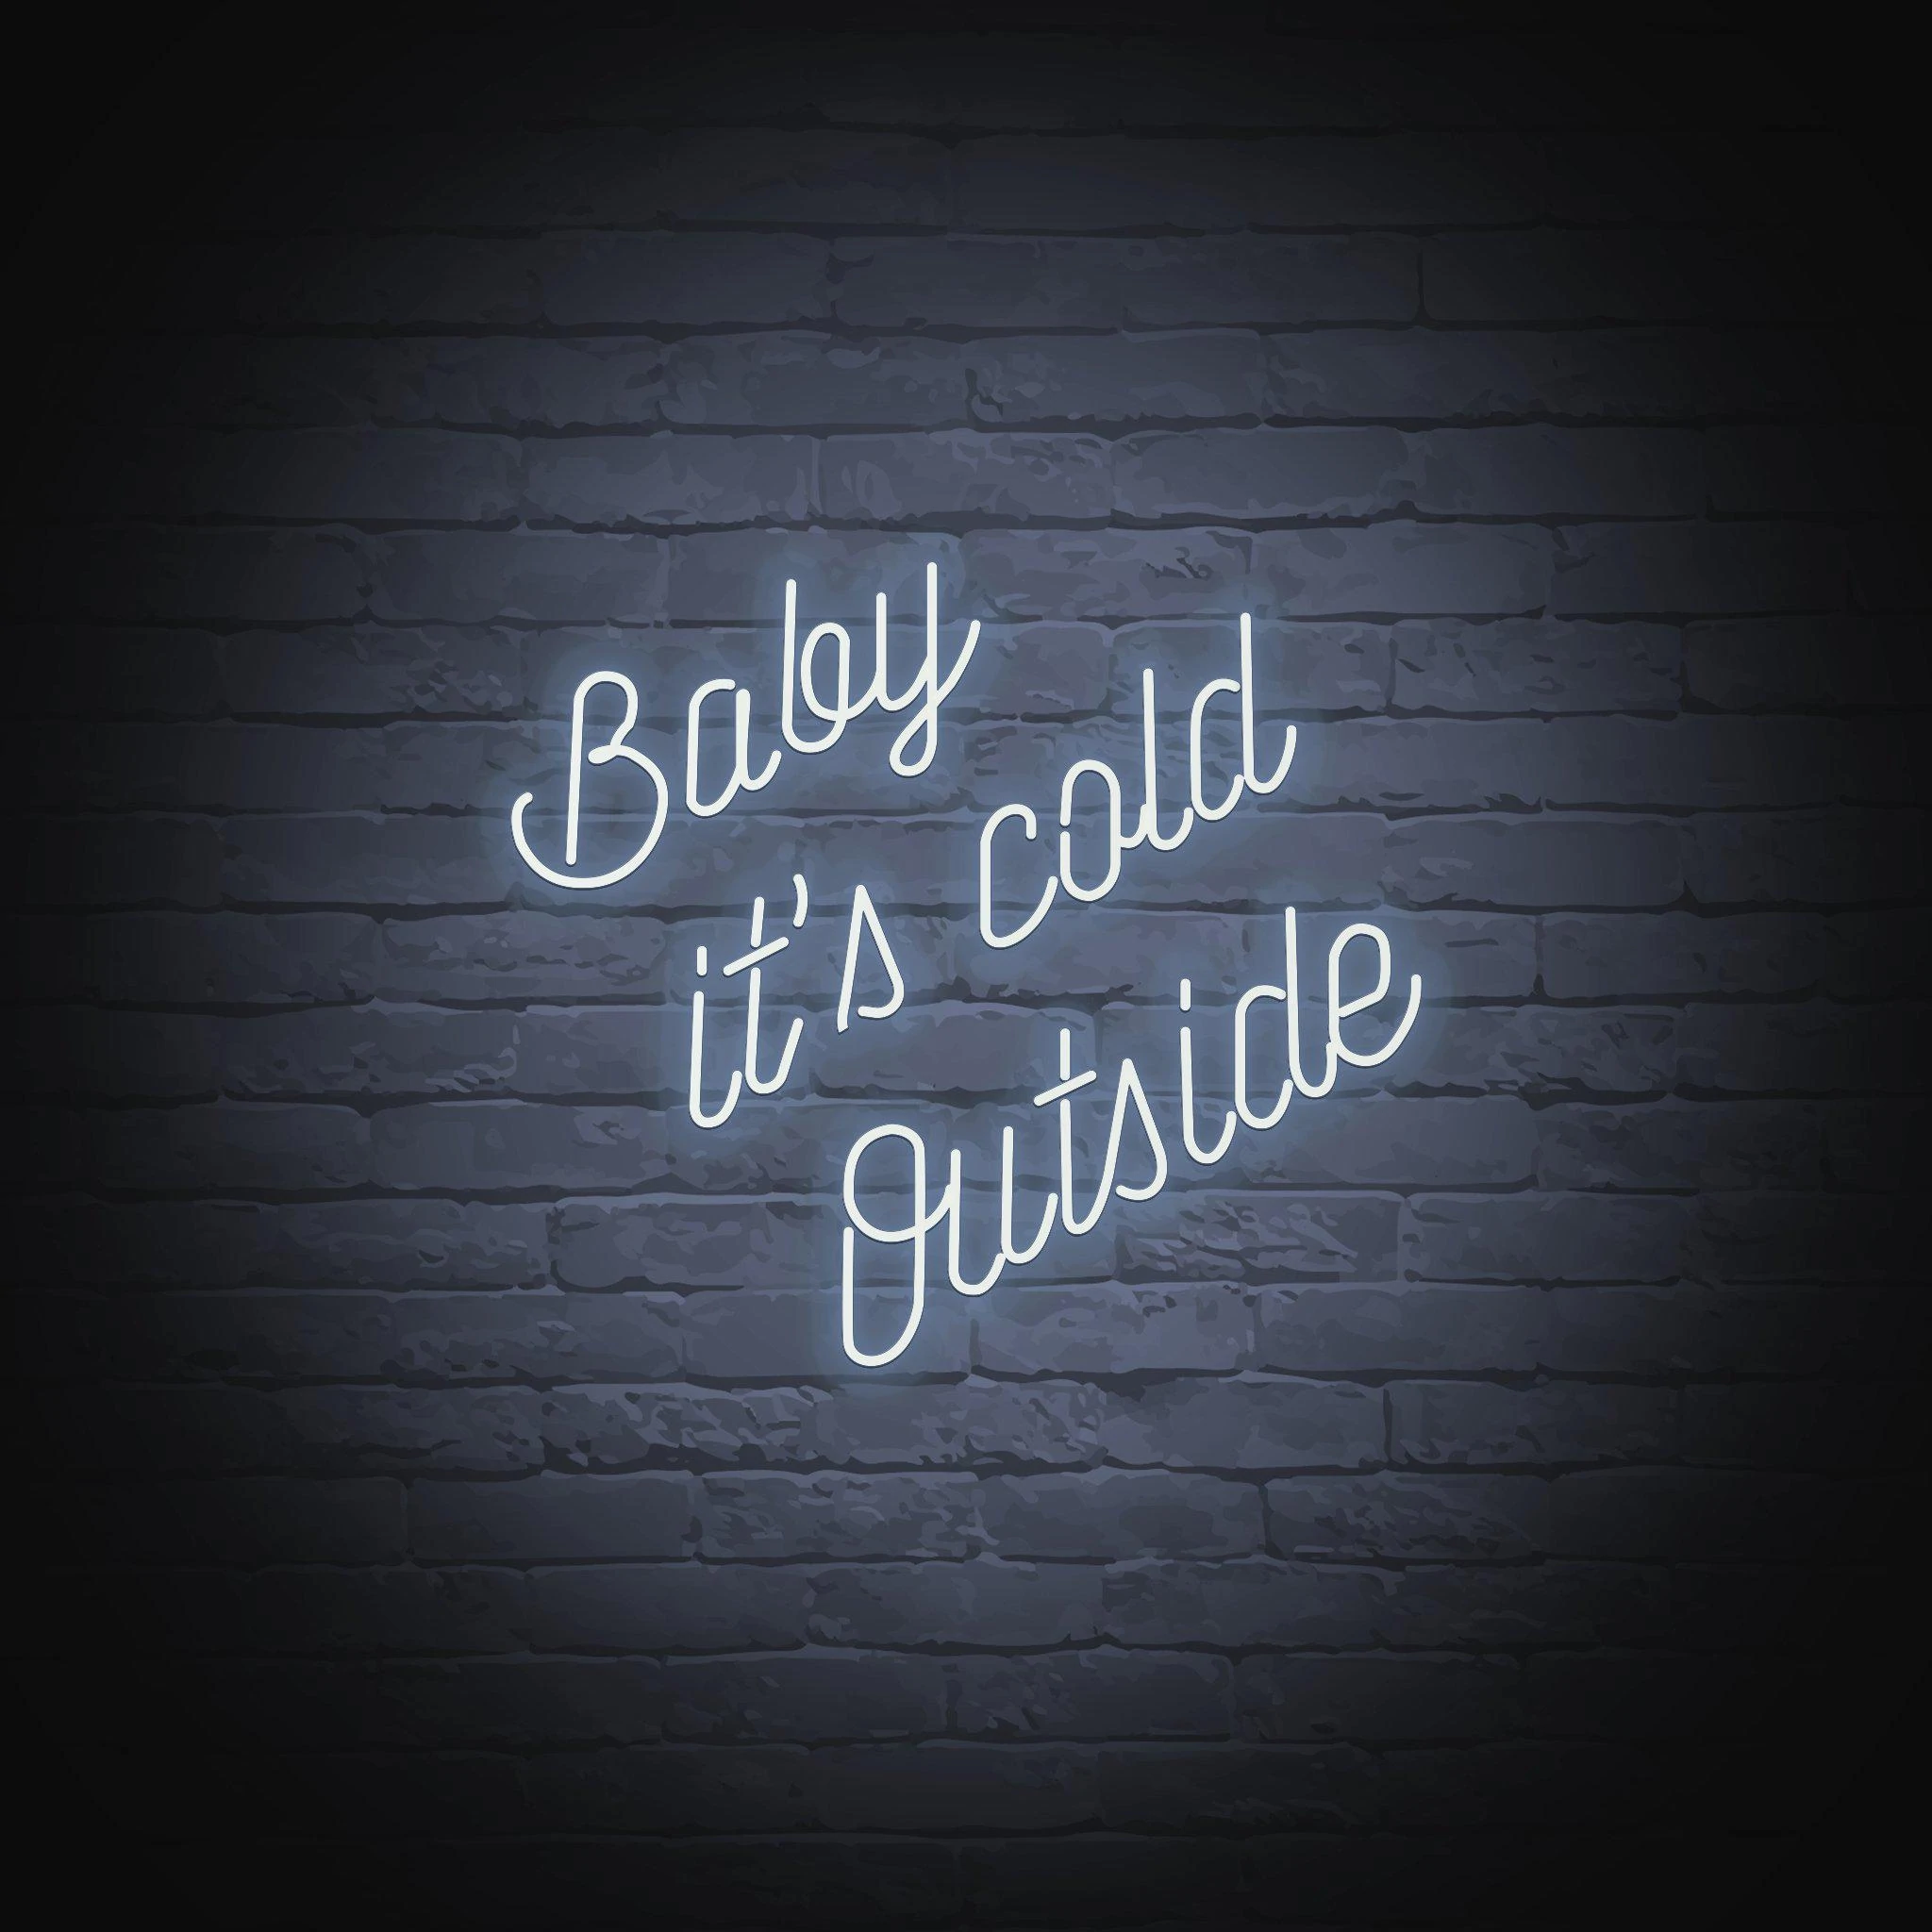 'BABY IT'S COLD OUTSIDE' NEON SIGN